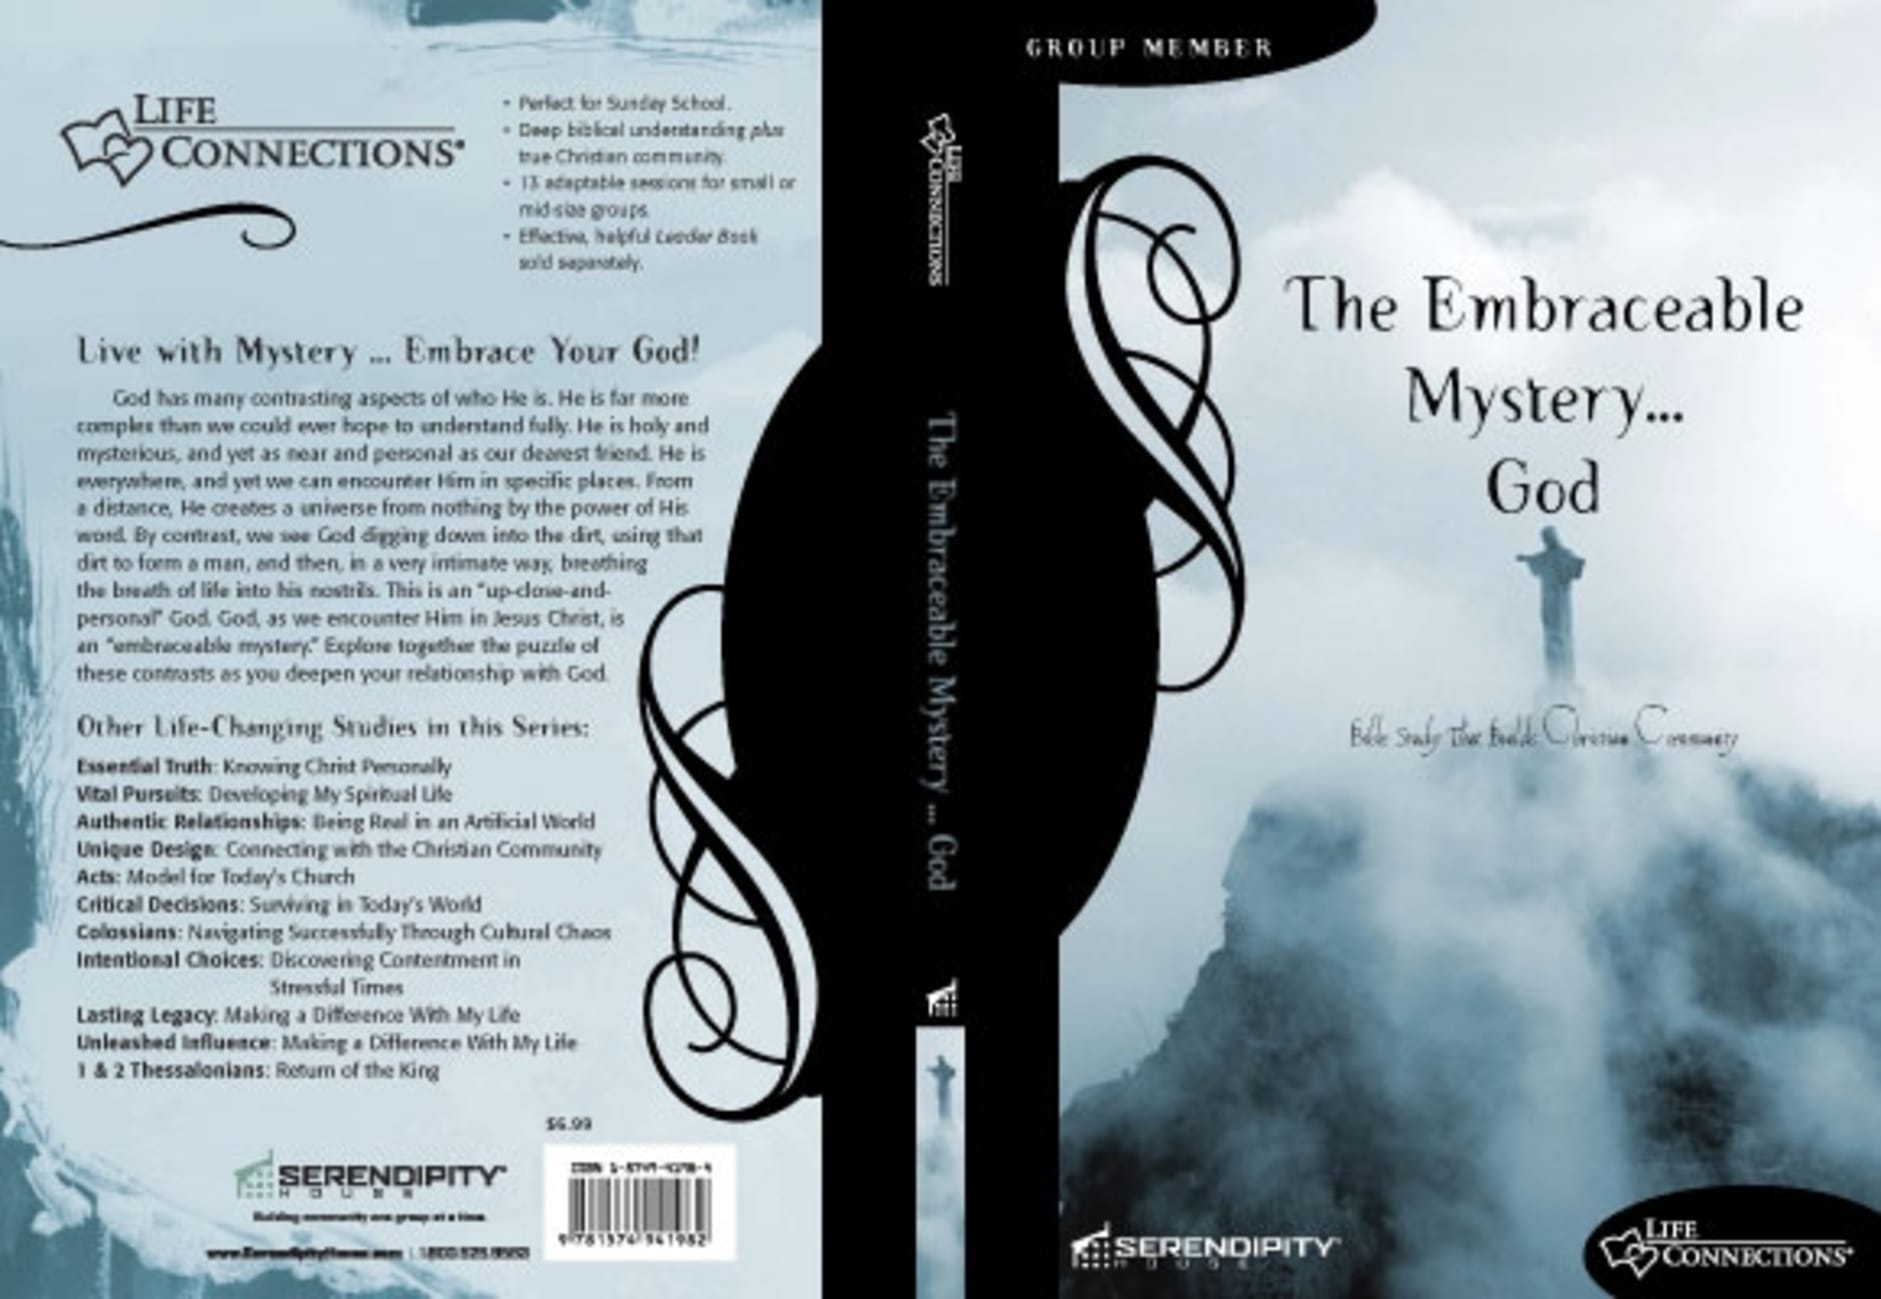 Embraceable Mystery...God (Student Guide) (Life Connections Series) Paperback